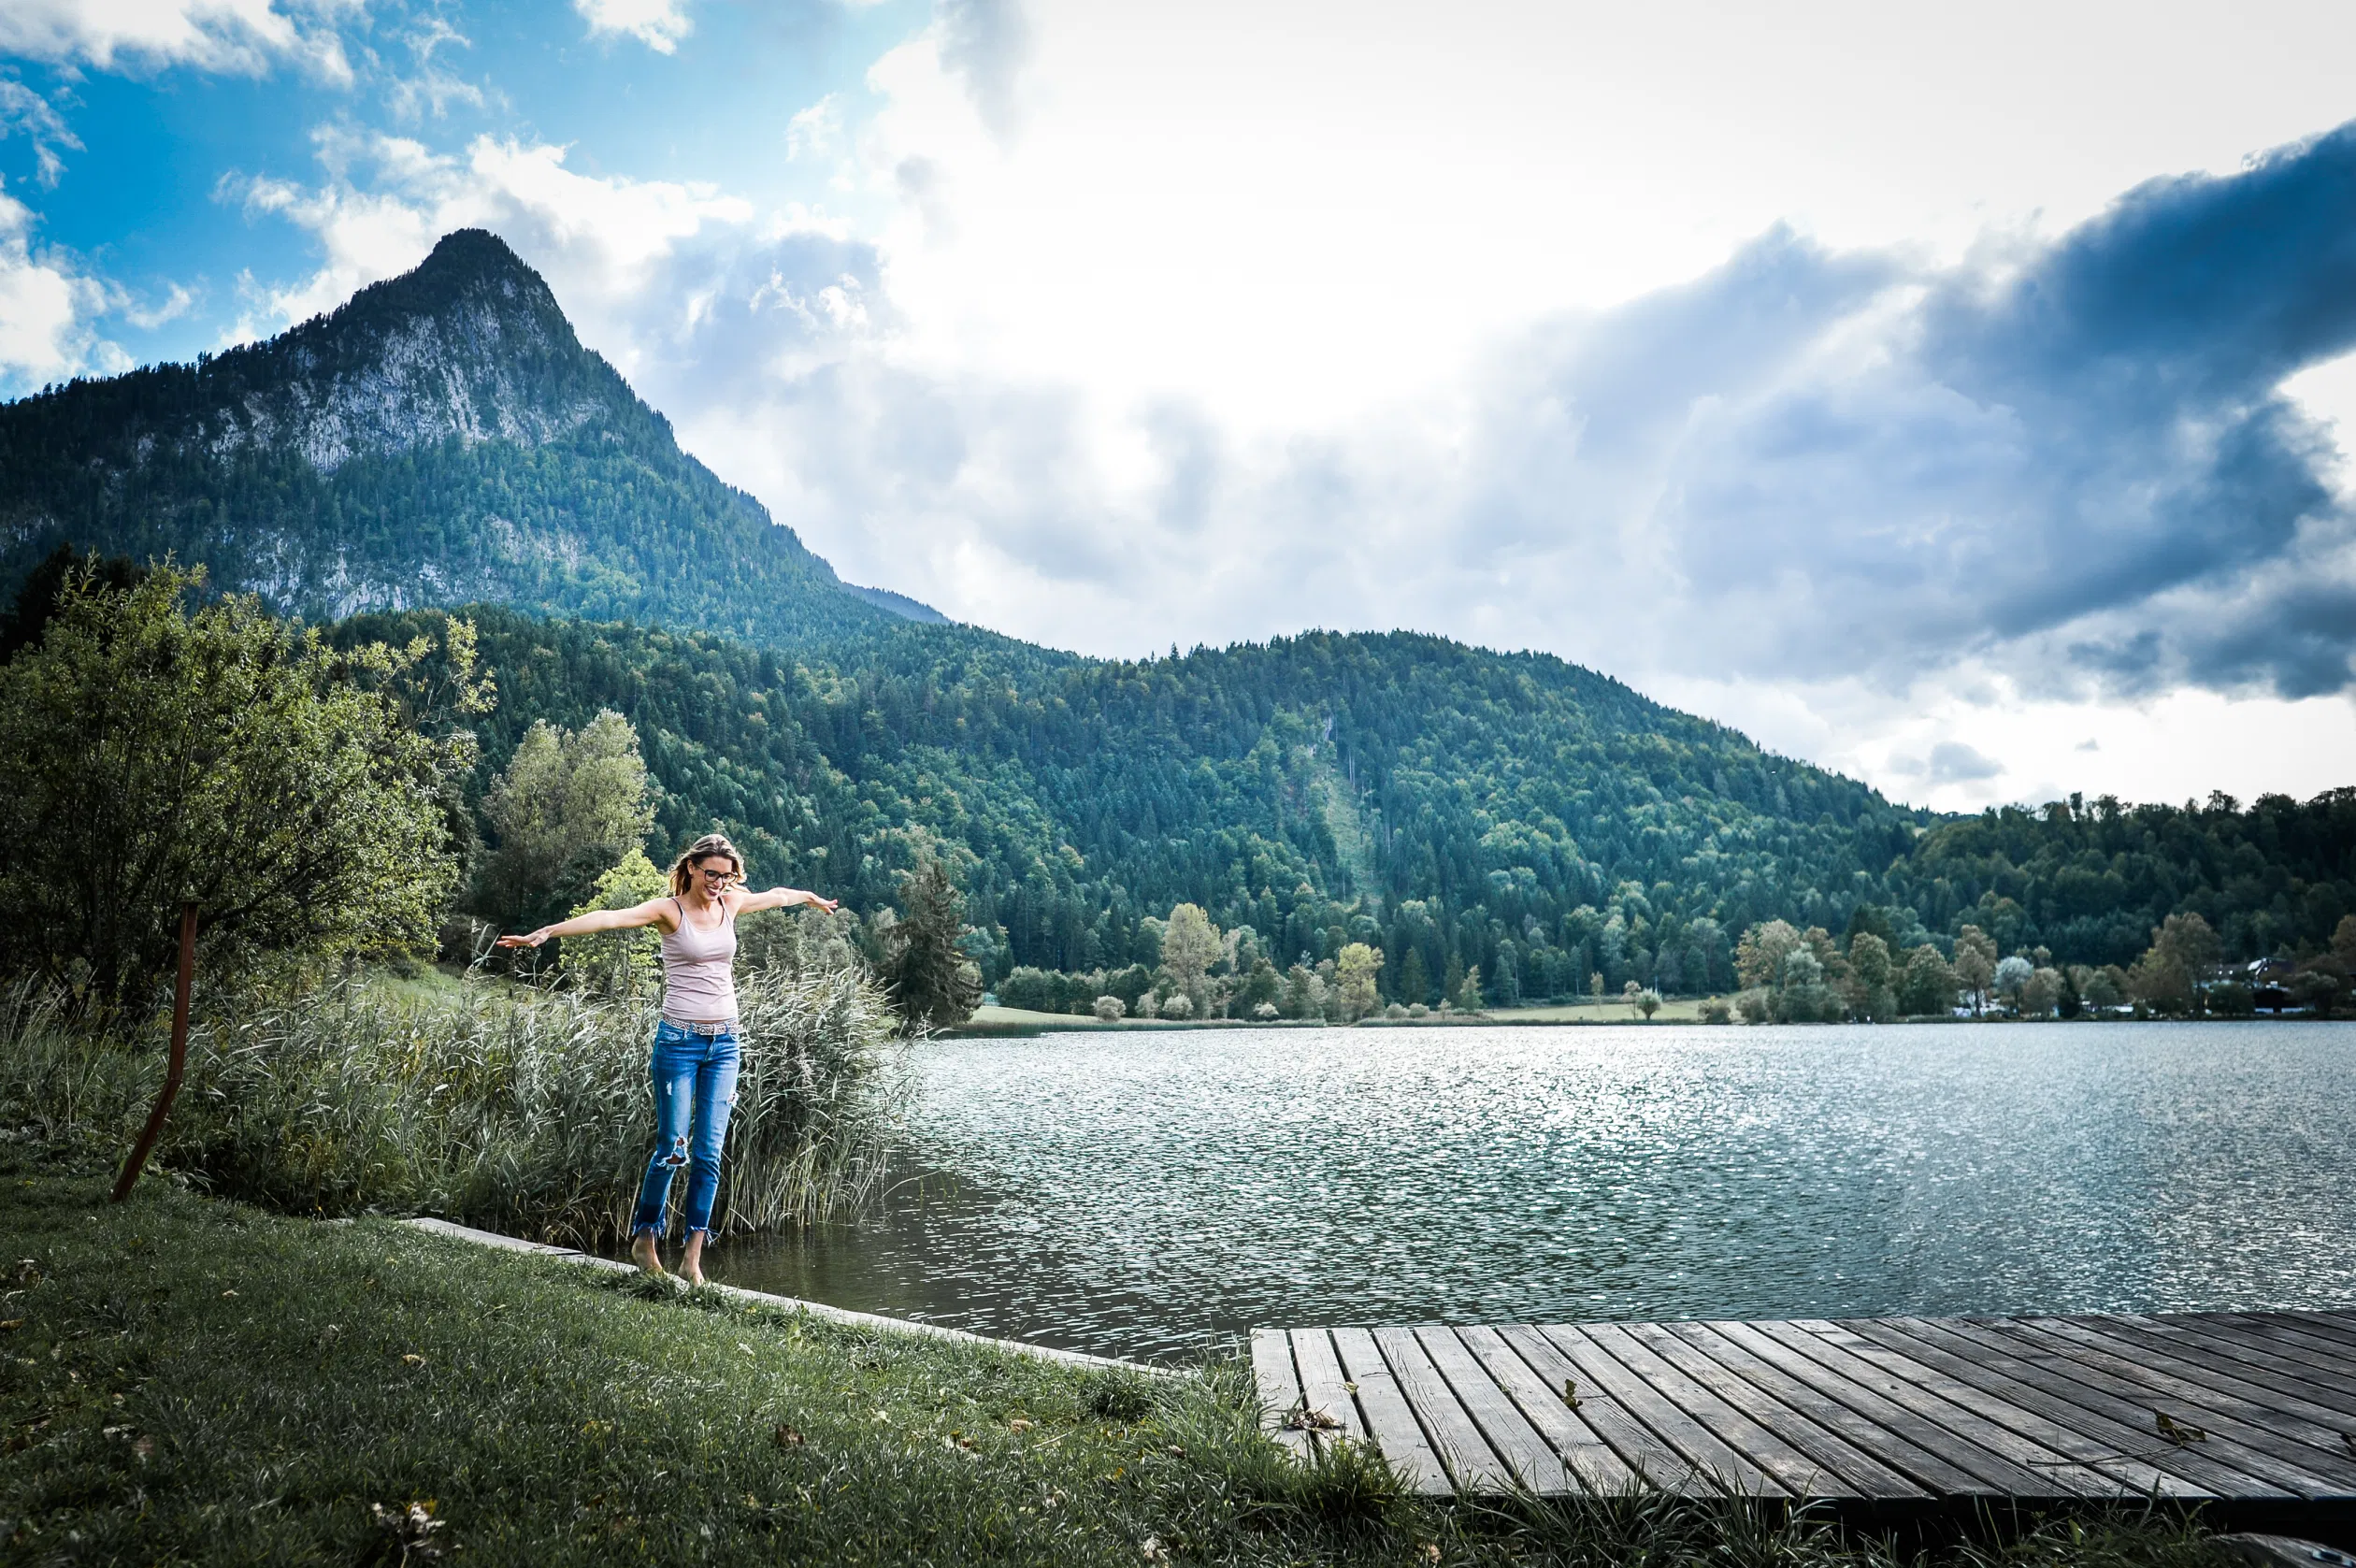 Woman enjoying her life by the lake with a mountain view